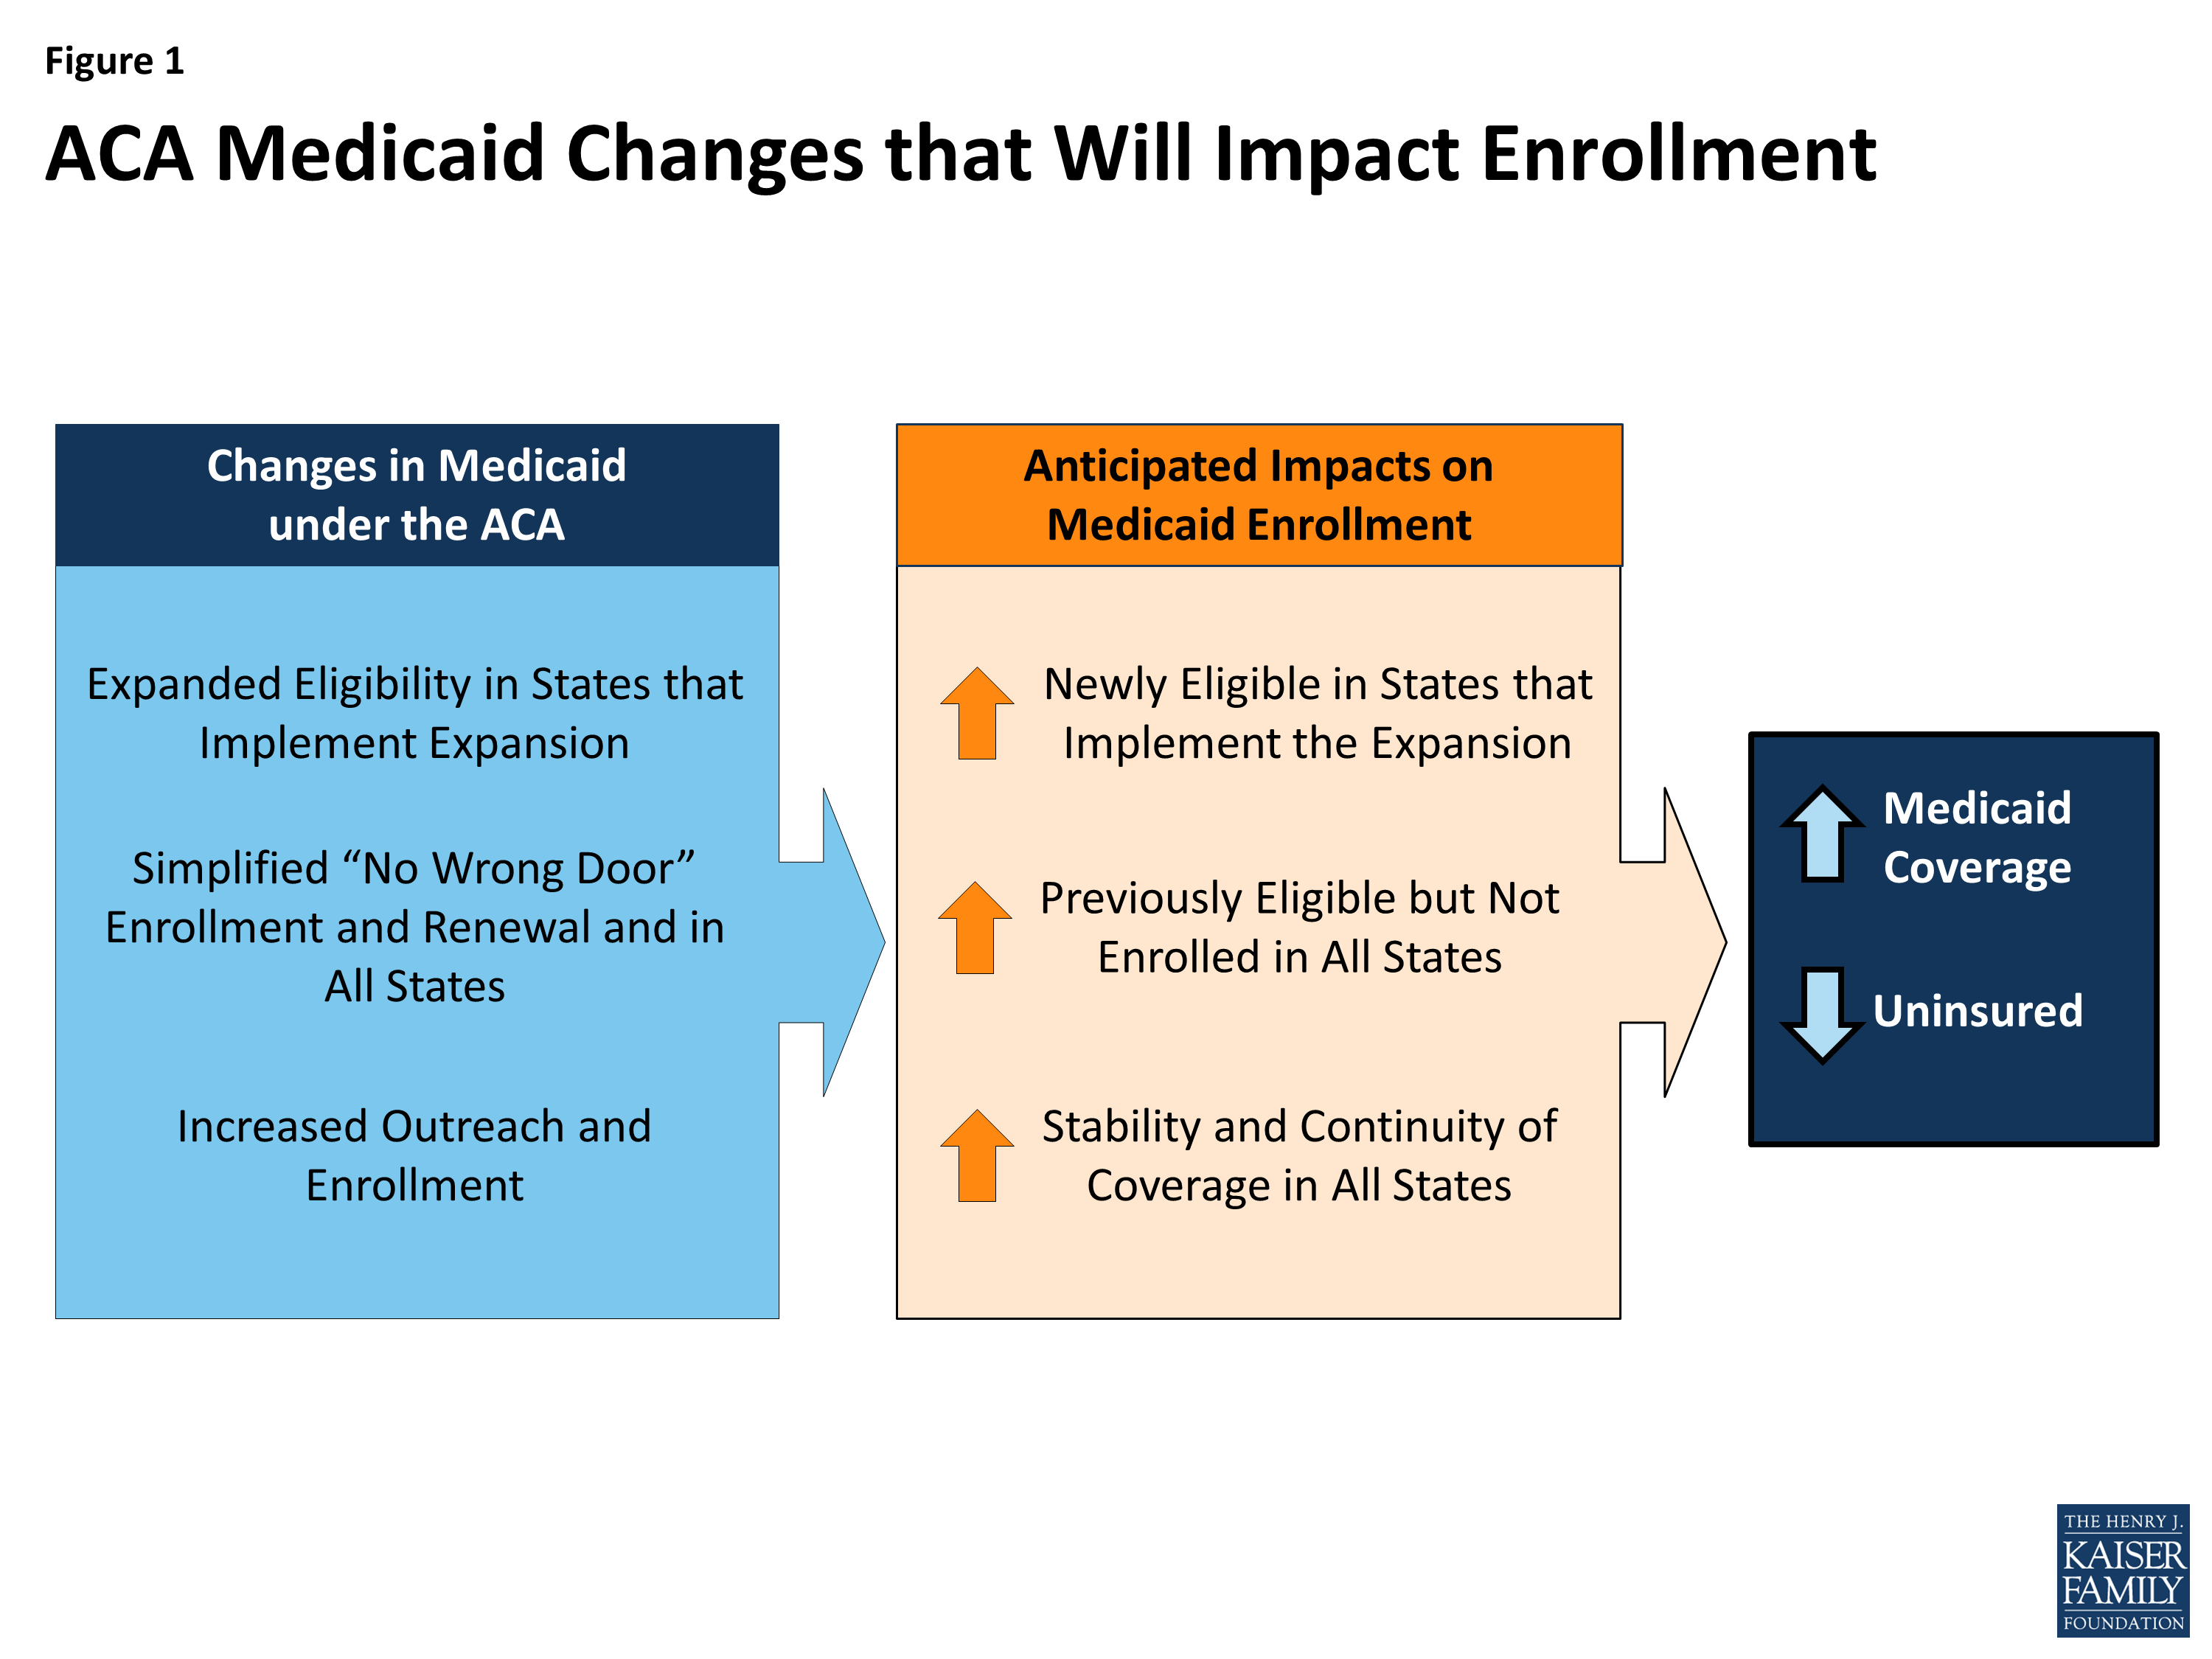 Figure 1: ACA Medicaid Changes that Will Impact Enrollment